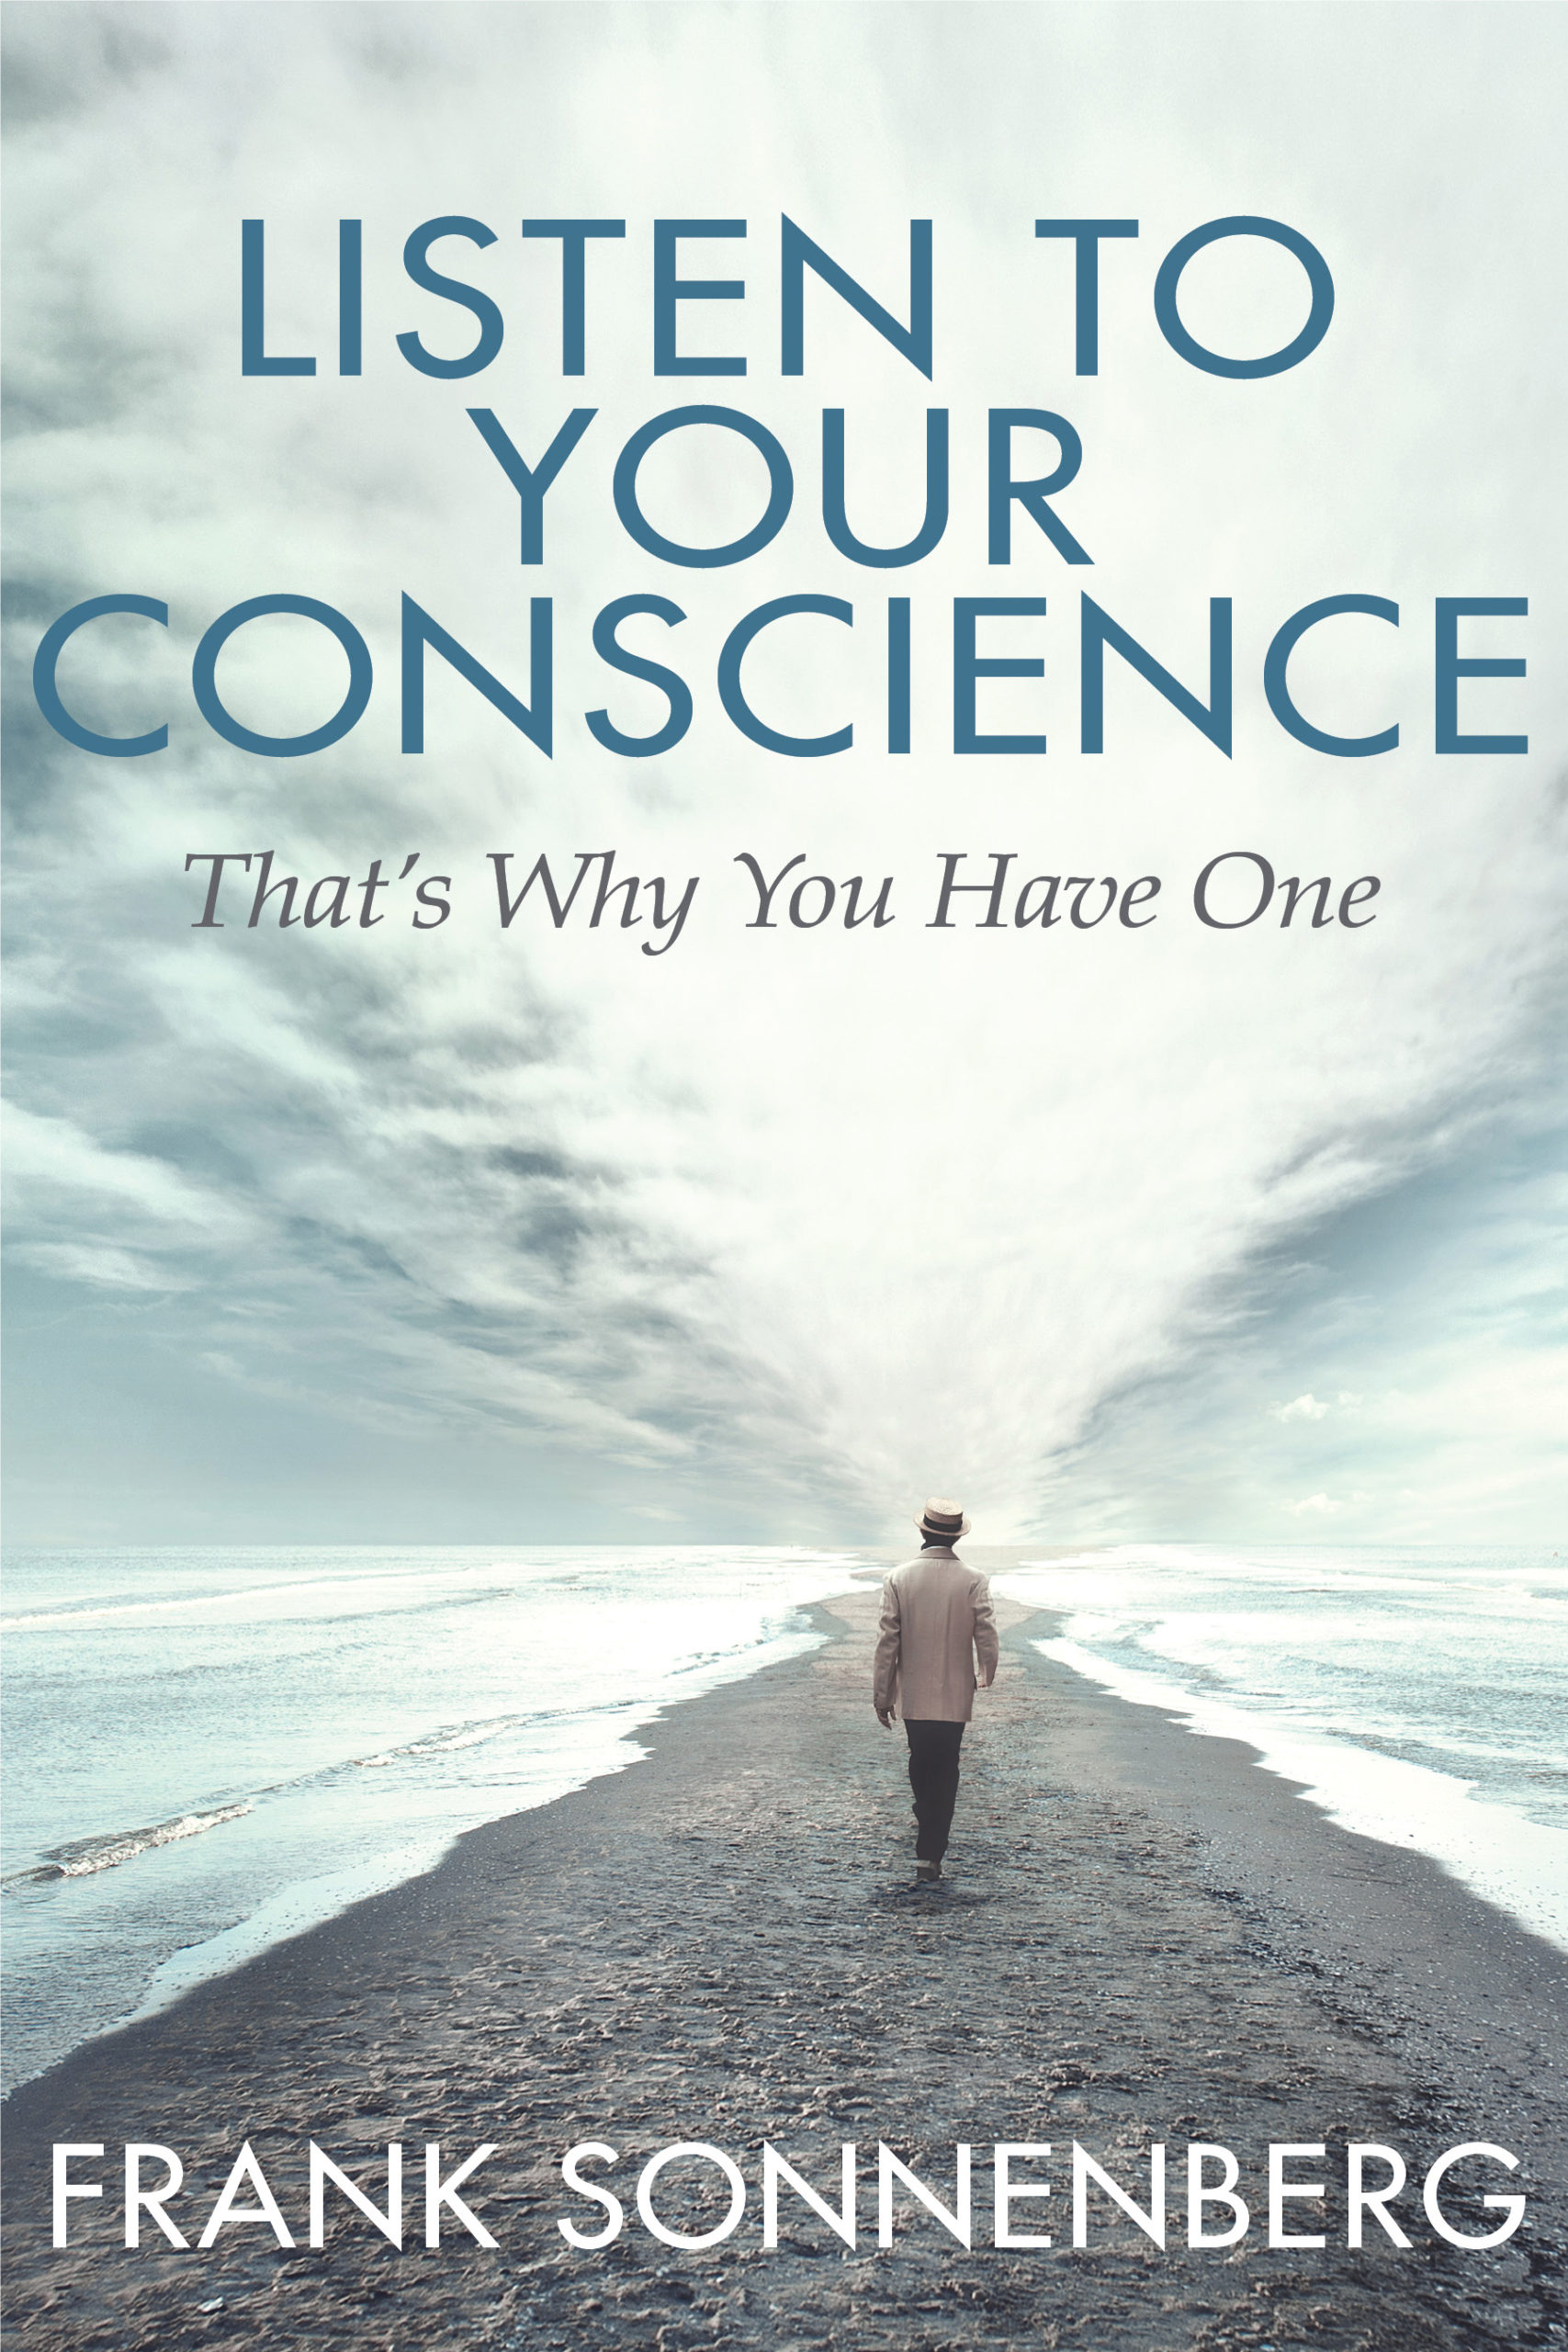 Listen to Your Conscience. That’s Why You Have One